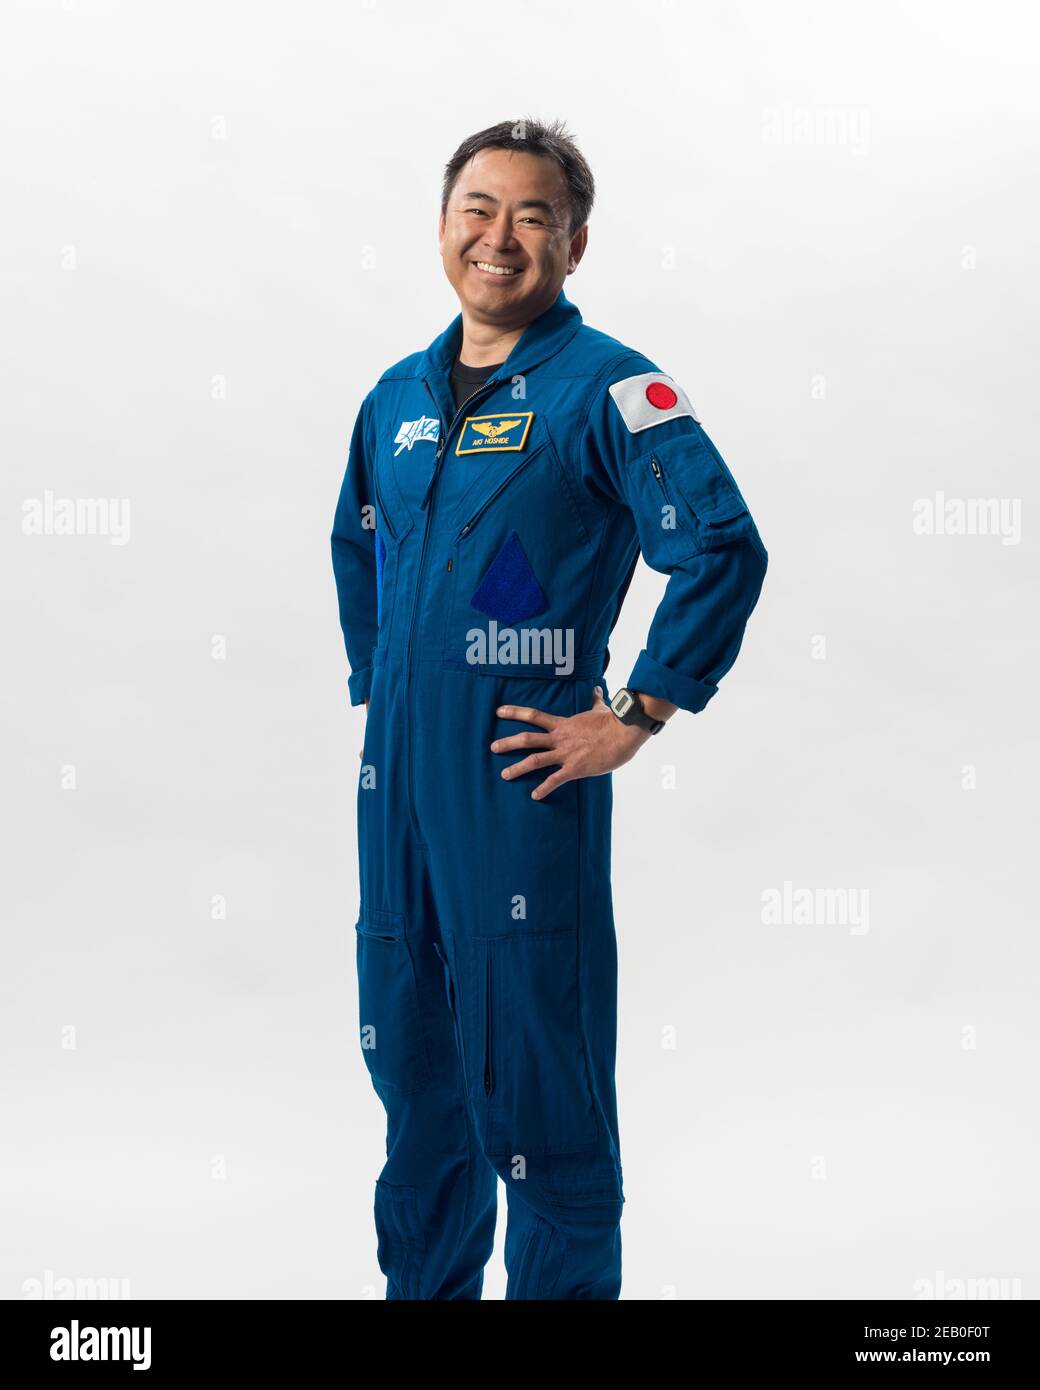 Japan Aerospace Exploration Agency astronaut and SpaceX Crew-2 Mission Specialist Akihiko Hoshide portrait at the Johnson Space Center September 29, 2020 in Houston, Texas. Stock Photo